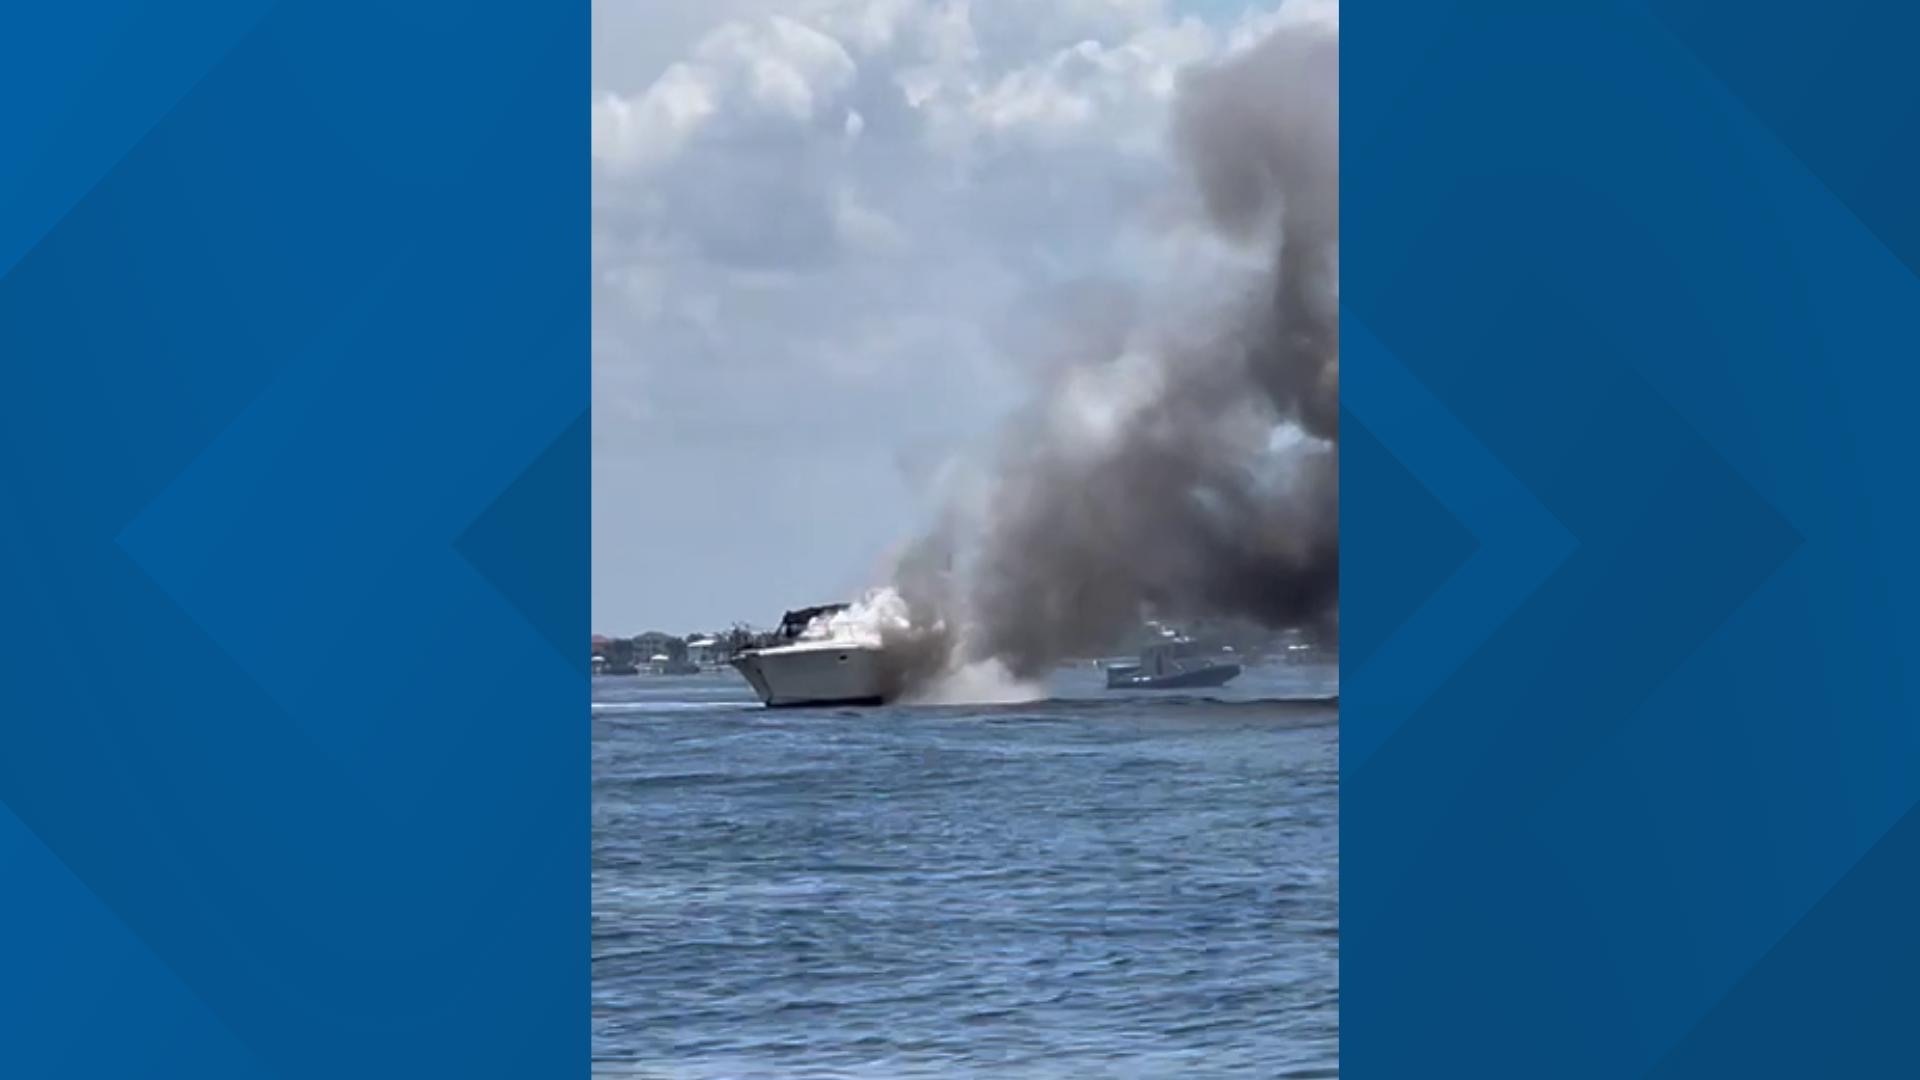 Video shows a boat fire happening Saturday afternoon near popular hangout spot Beer Can Island.